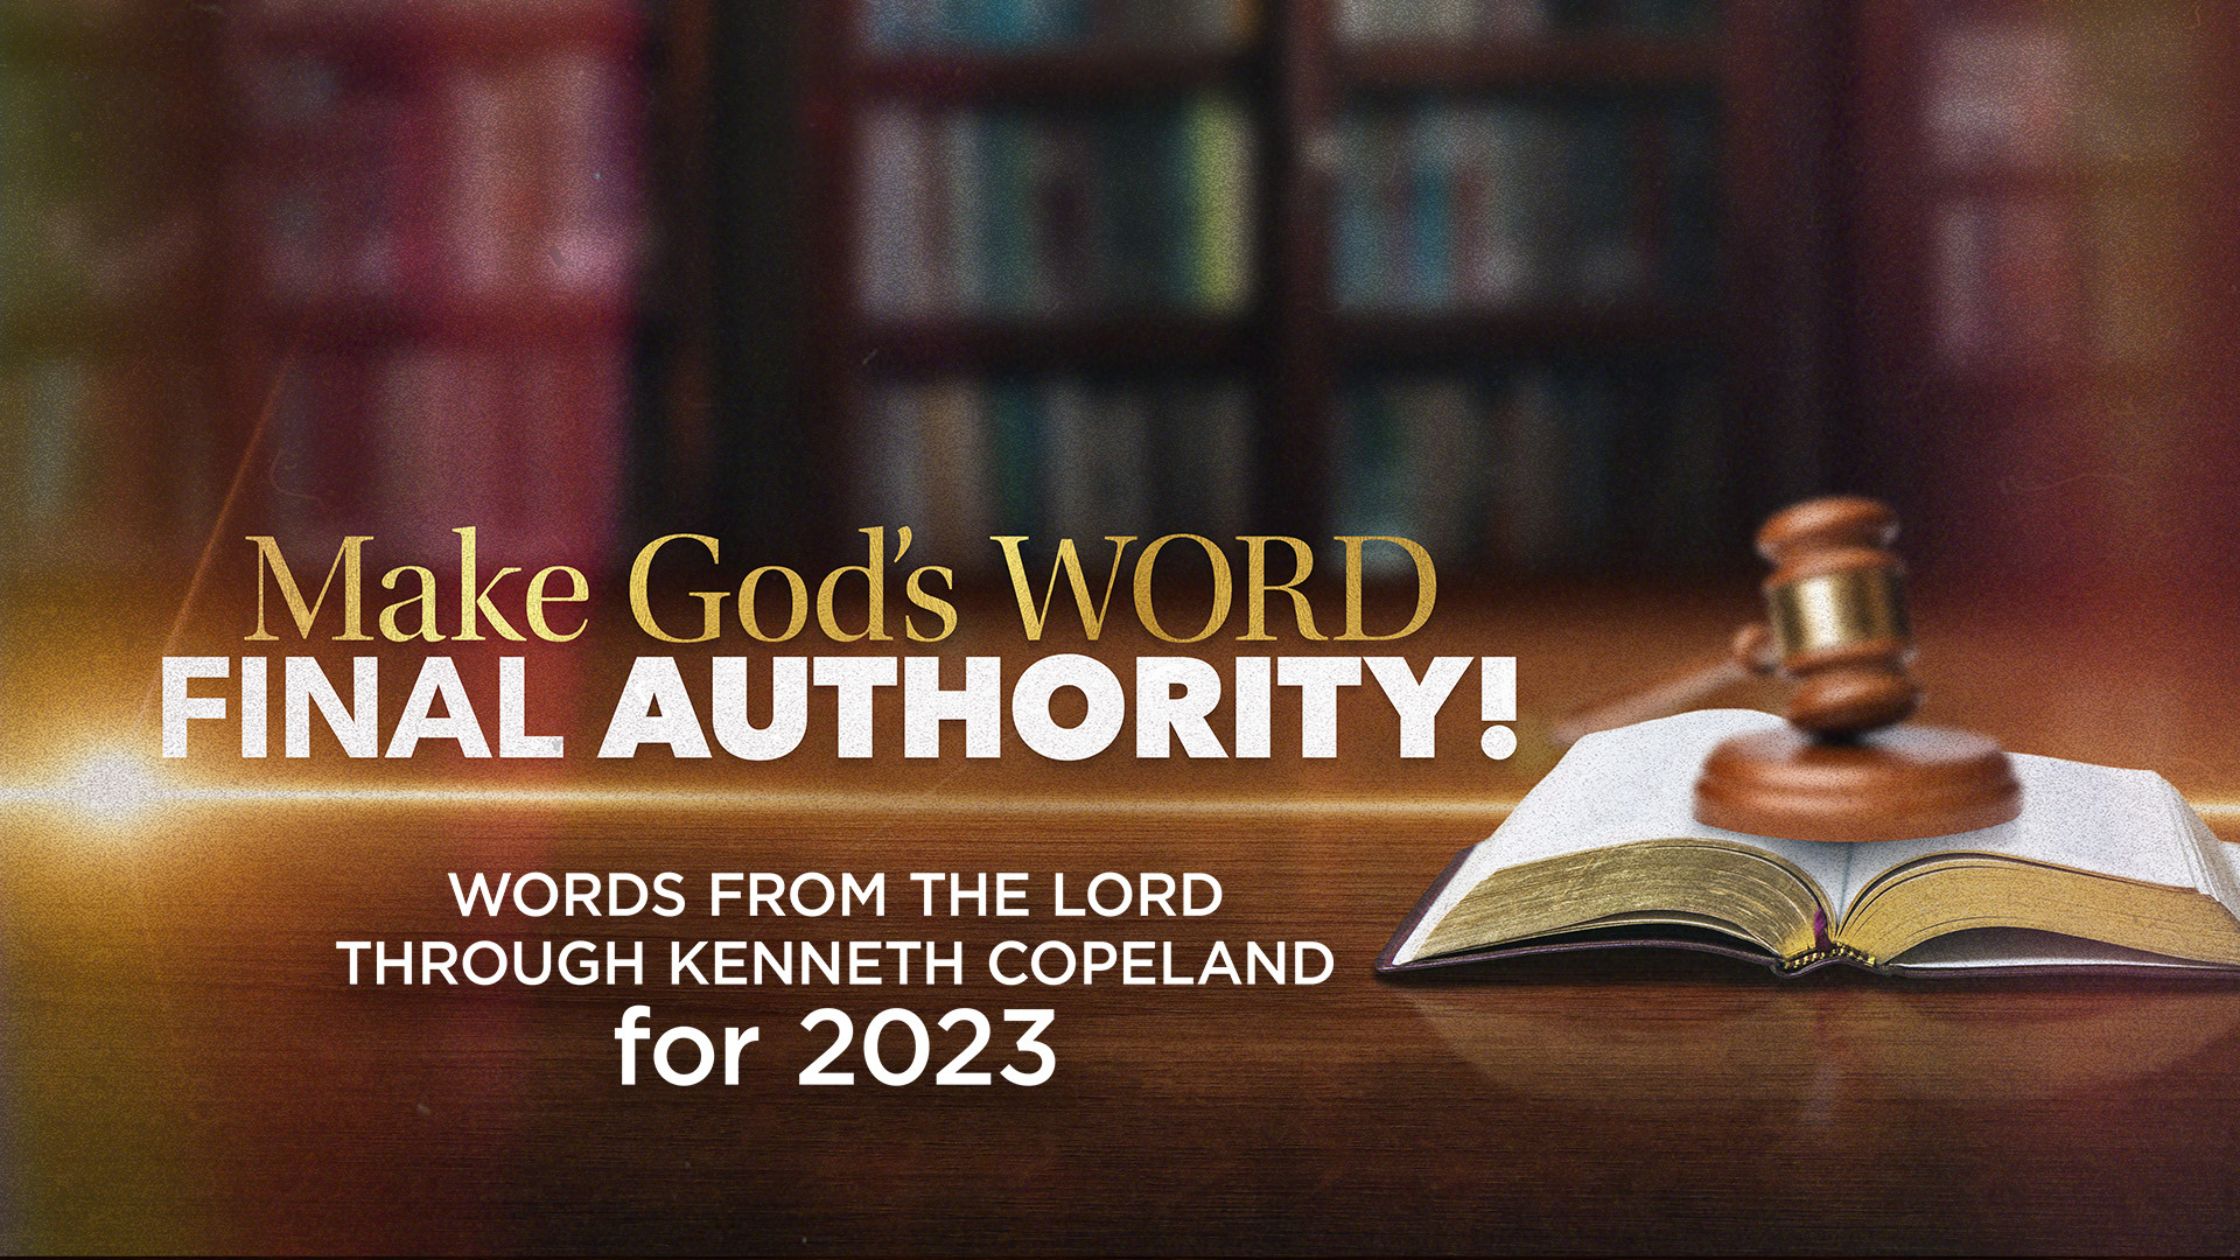 Make God's Word Final Authority